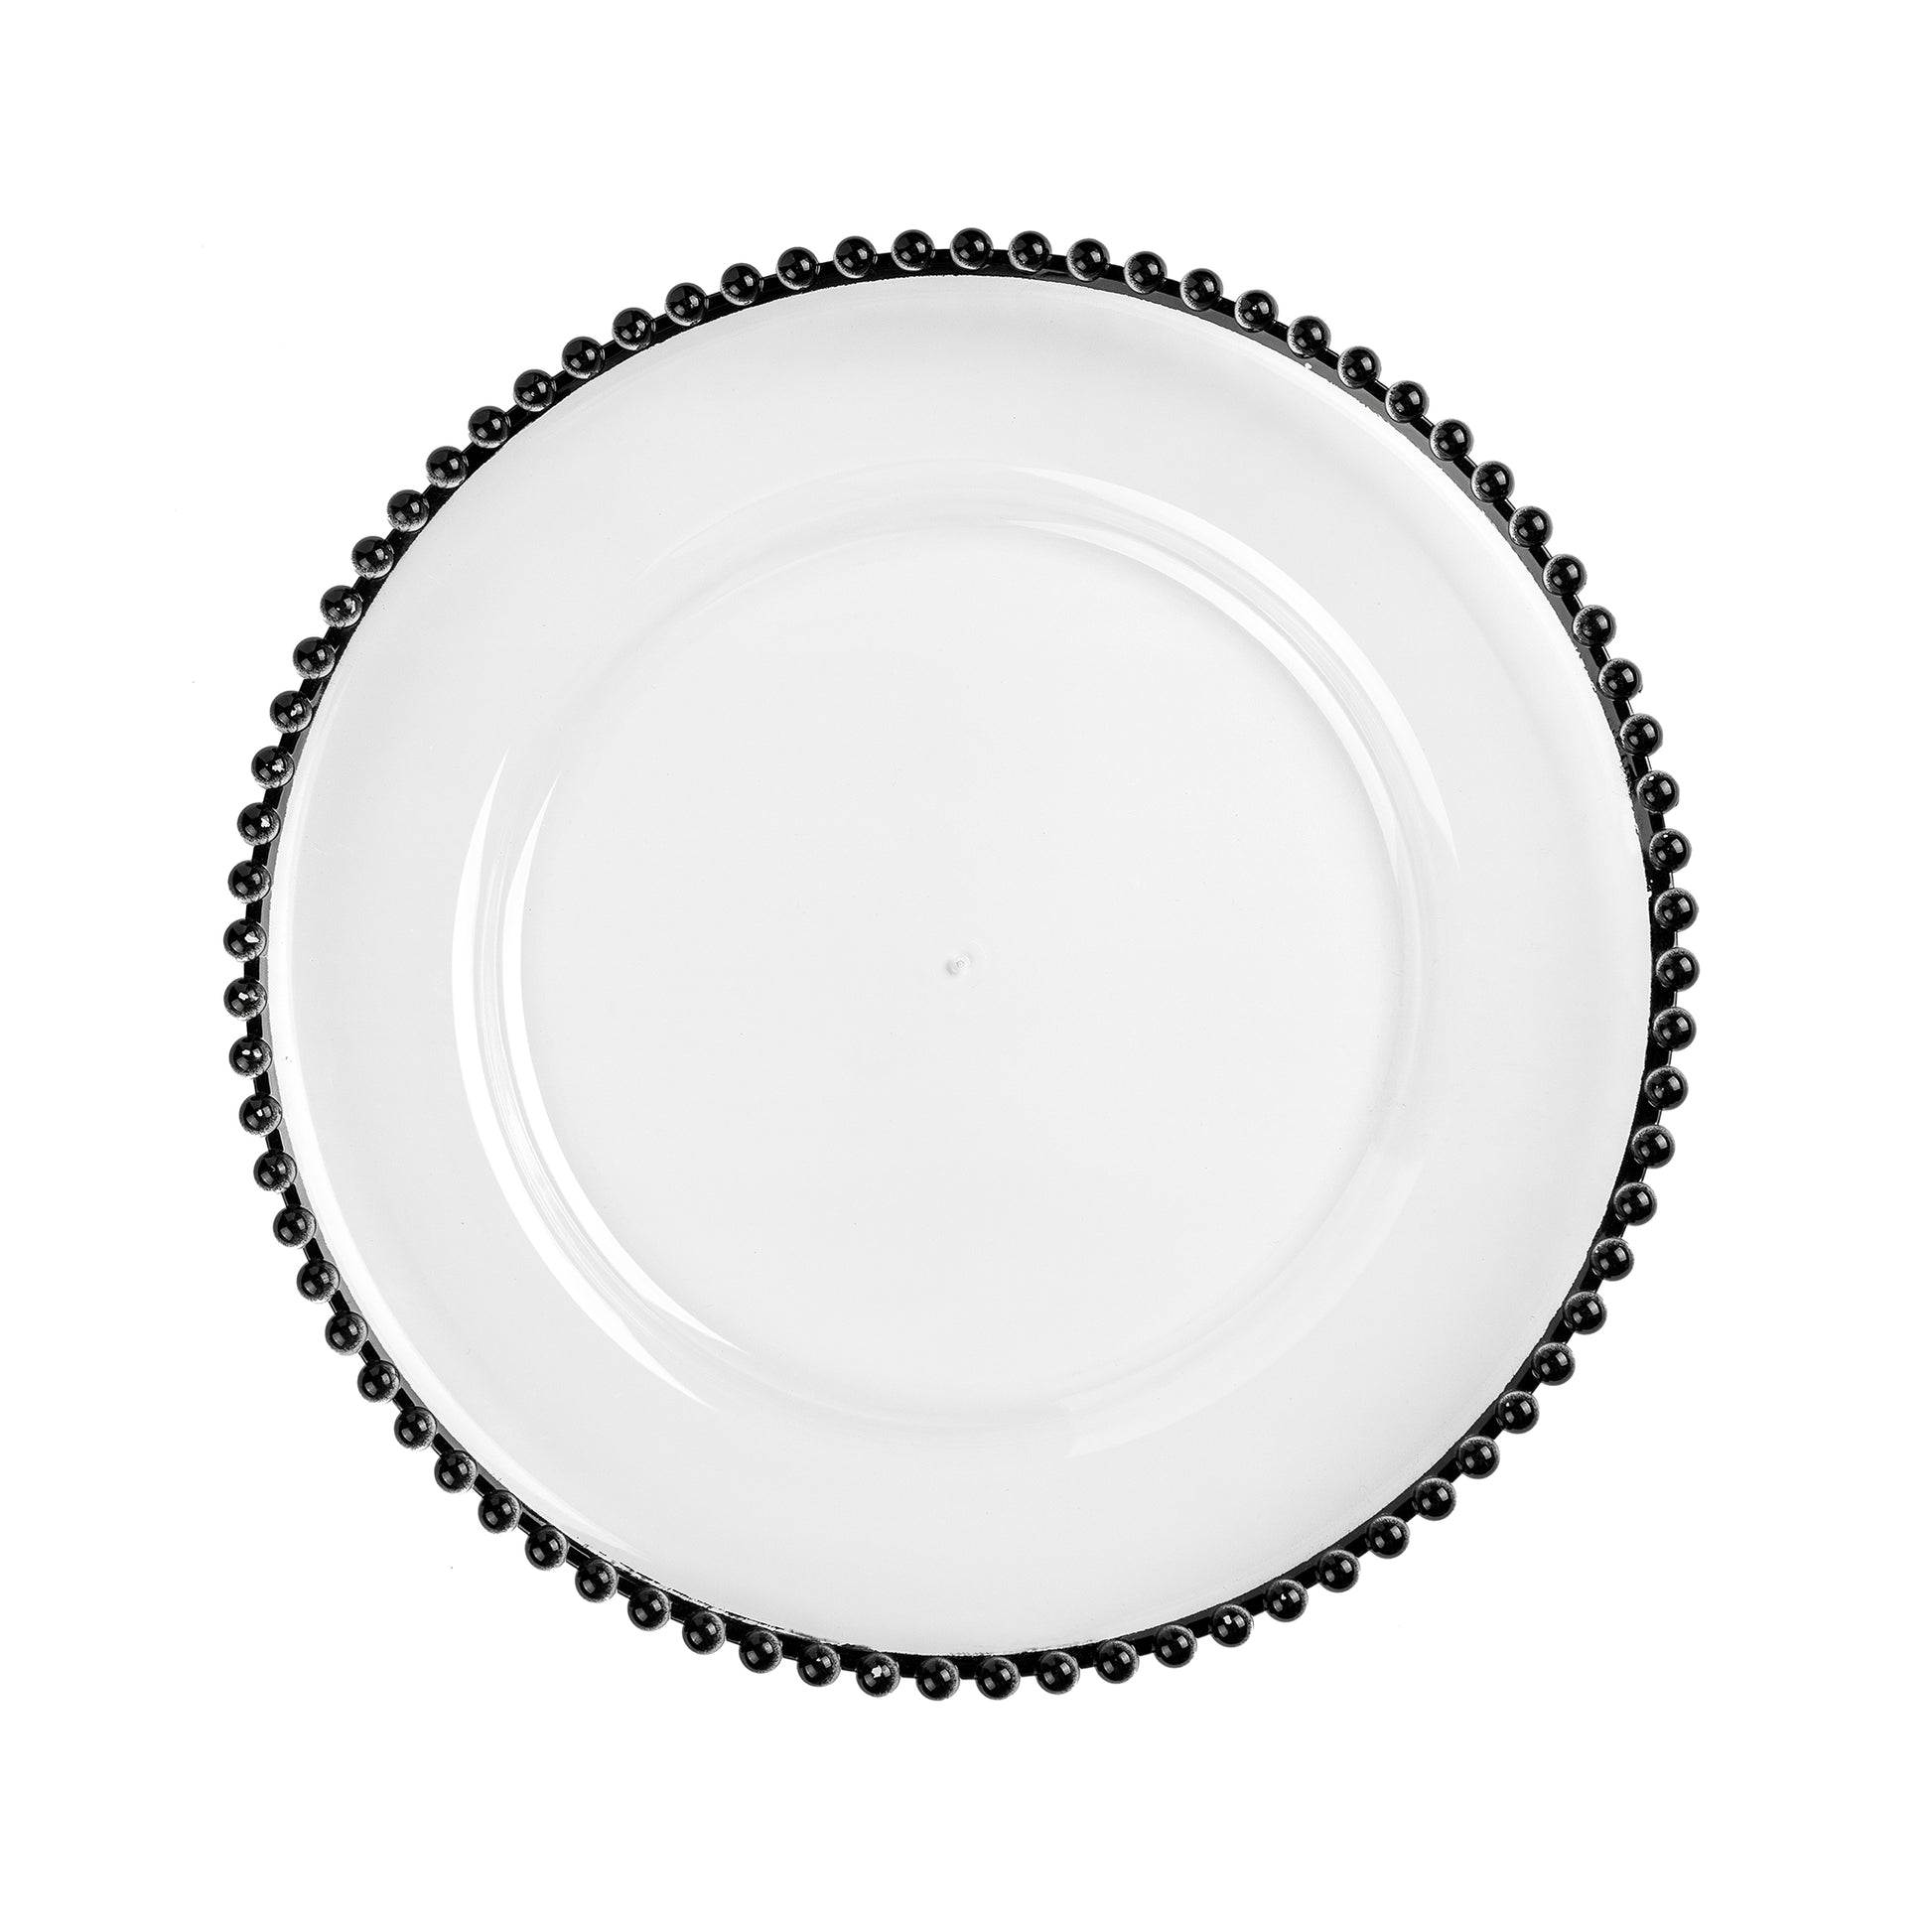 Acrylic Beaded 13" Round Charger Plate - Black Trim - CV Linens